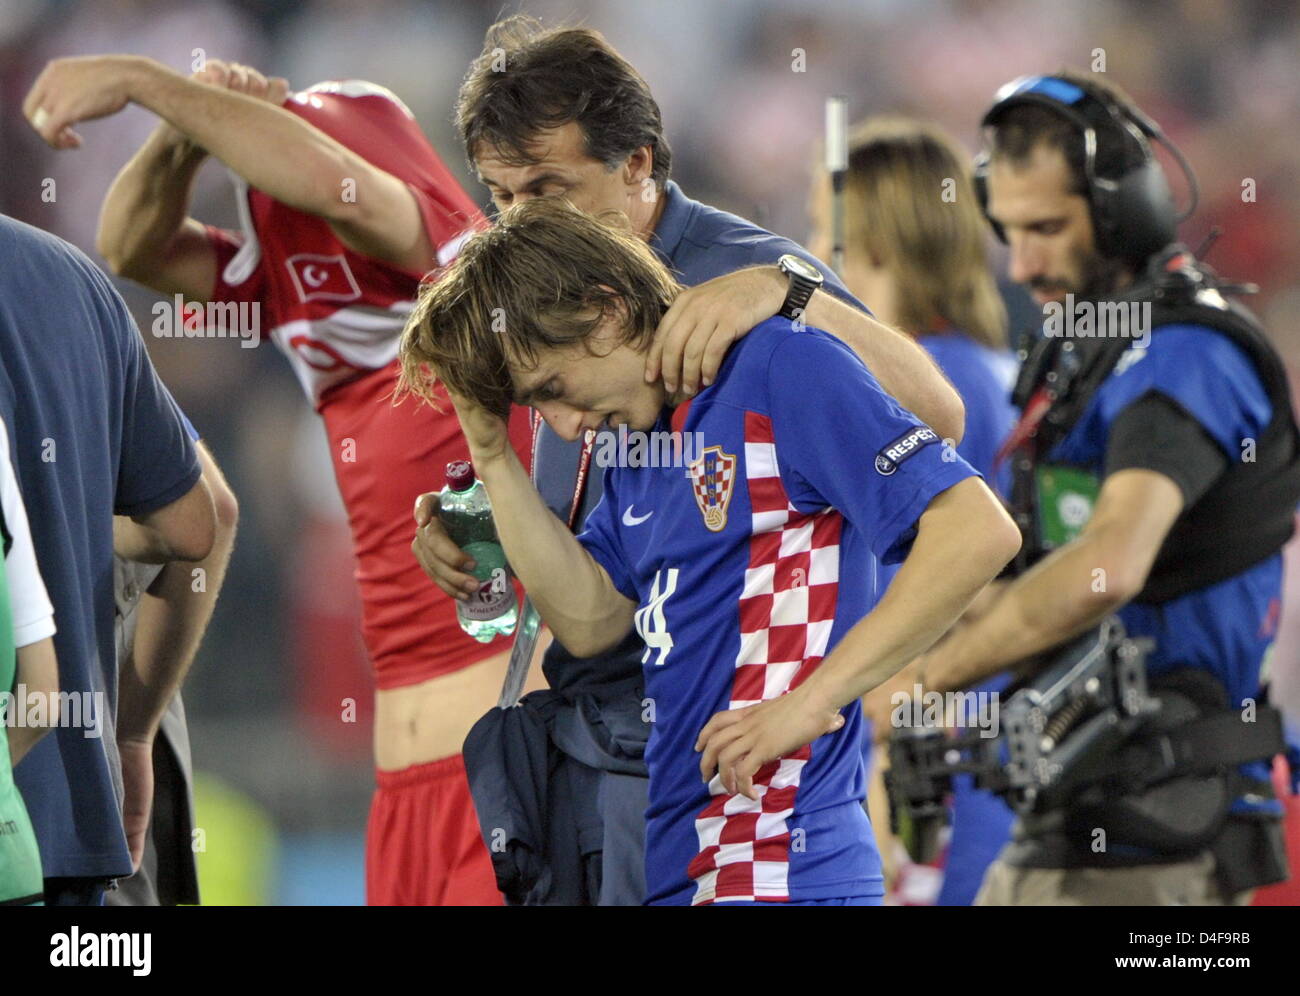 Luka Modric (C) of Croatia leaves the pitch after the UEFA EURO 2008 quarter final match between Croatia and Turkey at the Ernst Happel stadium in Vienna, Austria, 20 June 2008. Turkey won 1:3 in penalty shootout. Photo: Achim Scheidemann dpa +please note UEFA restrictions particulary in regard to slide shows and 'No Mobile Services'+ +++(c) dpa - Bildfunk+++ Stock Photo